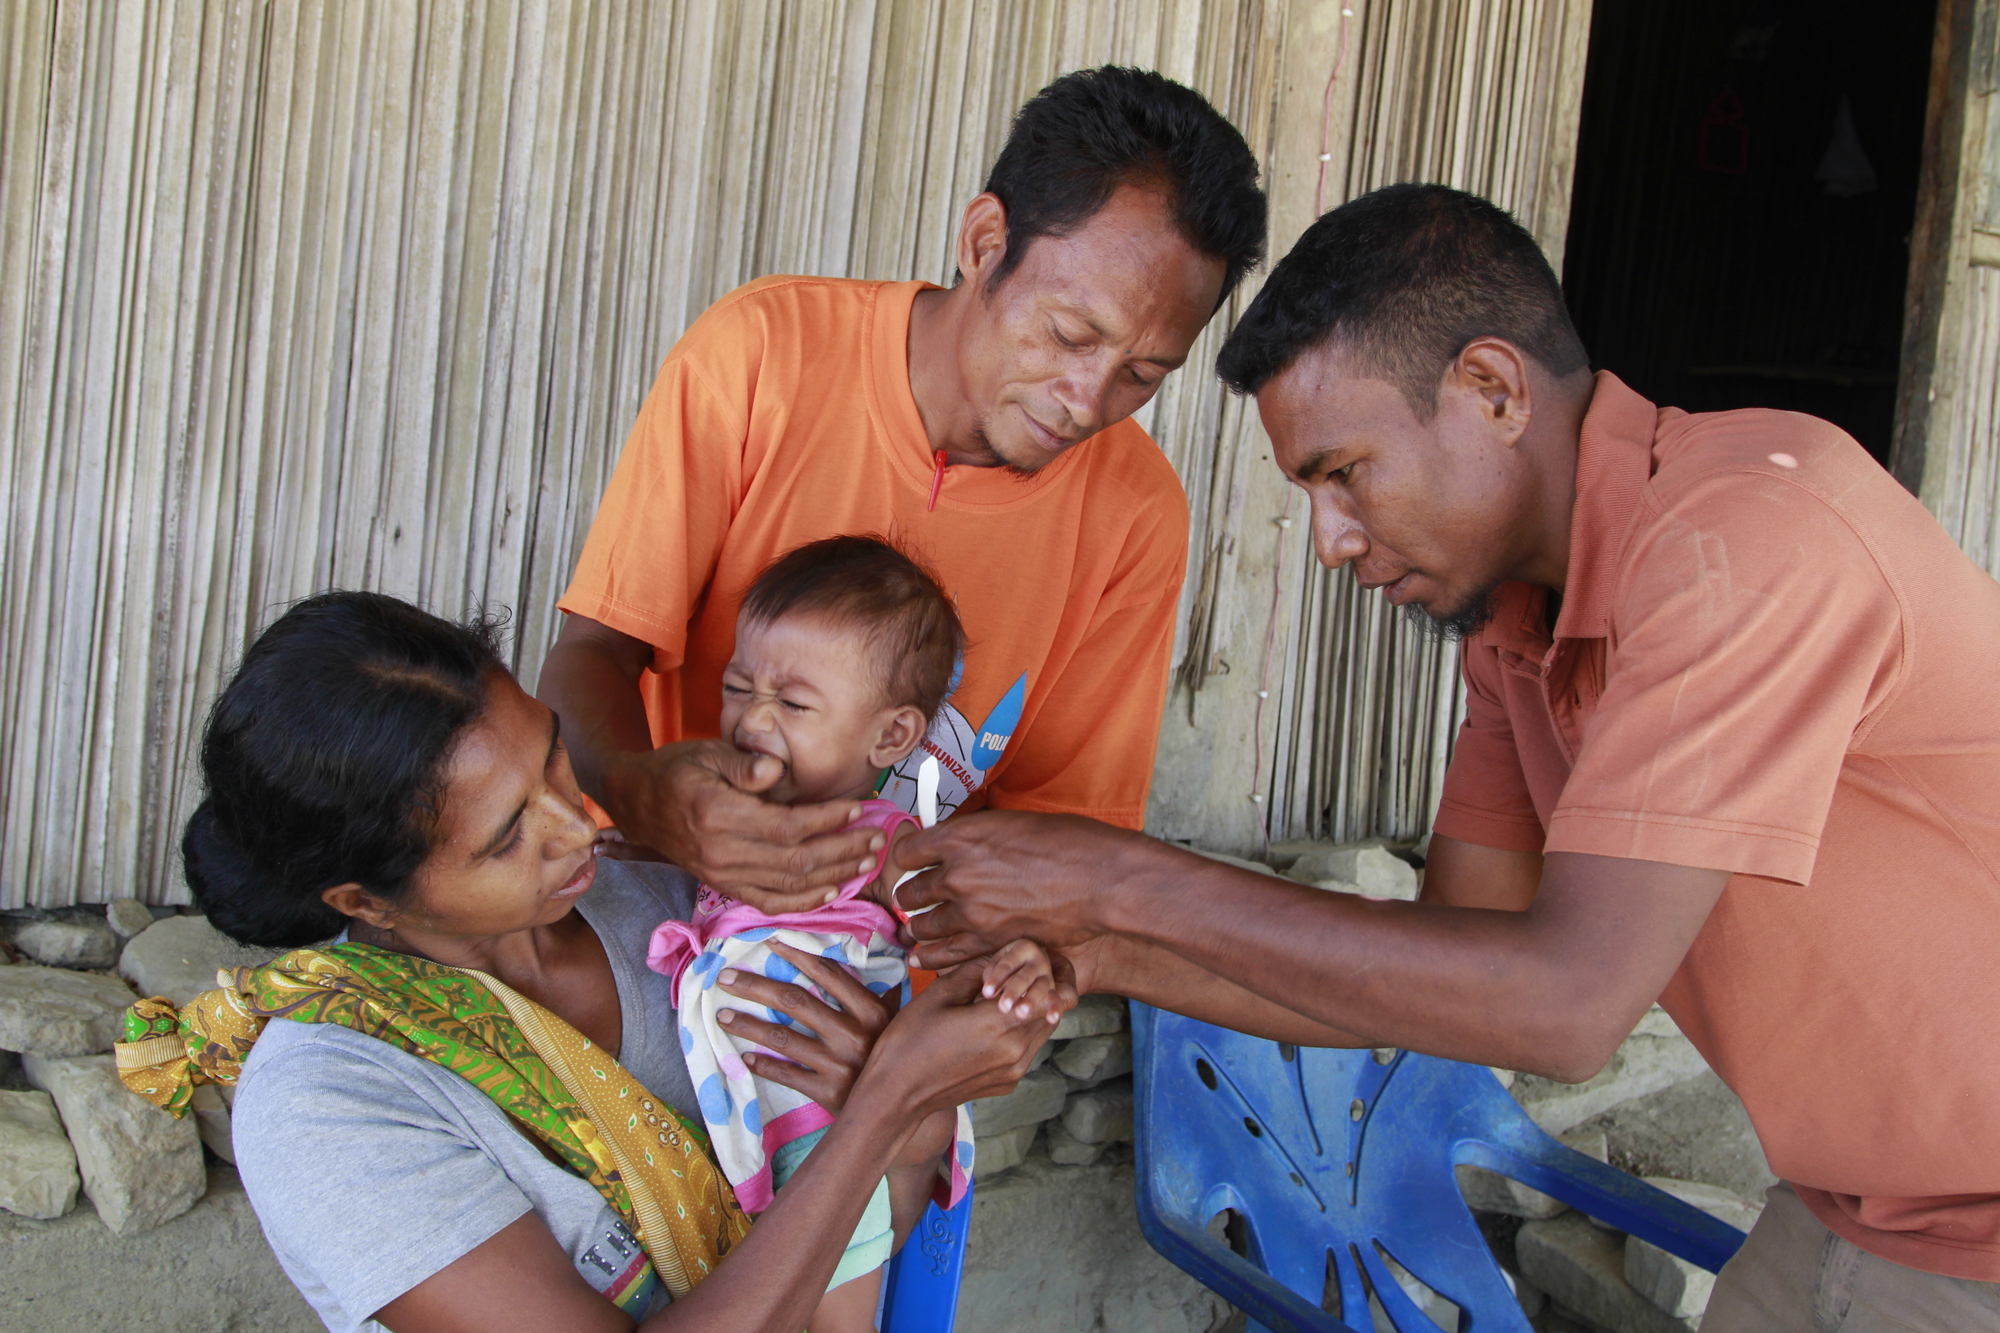 Alarico (centre back) identified baby Azelia as malnourished, and supported her mother Mariana (left) to improve her daughter’s health. Photo: Jaime dos Reis/World Vision 